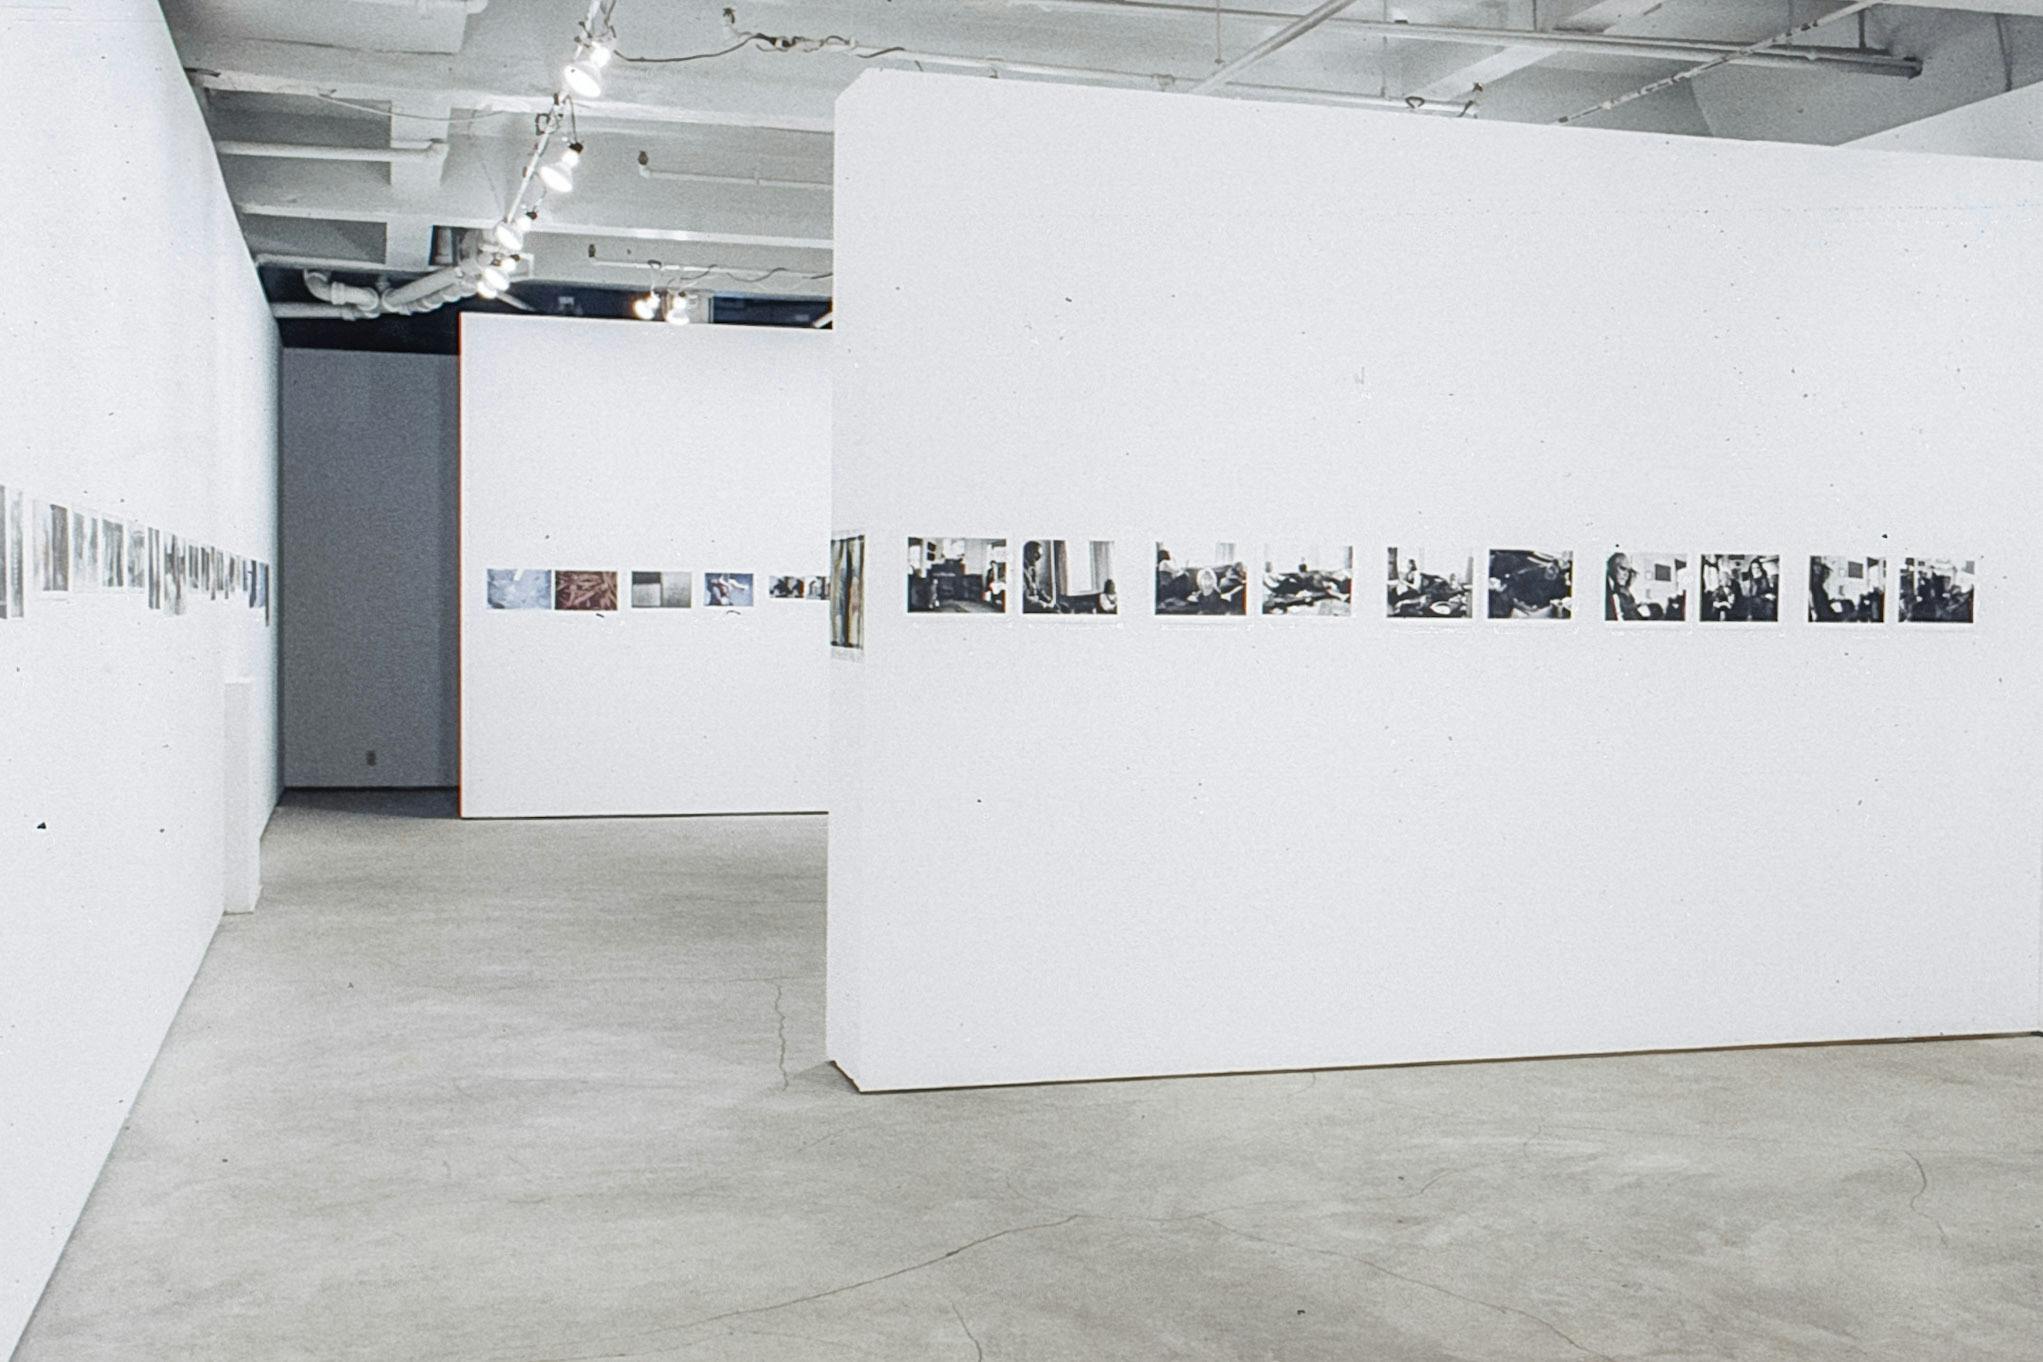 A large gallery space with a white wall in the centre. Across all visible walls, there are a variety of colour and black and white photographs of slightly different sizes.